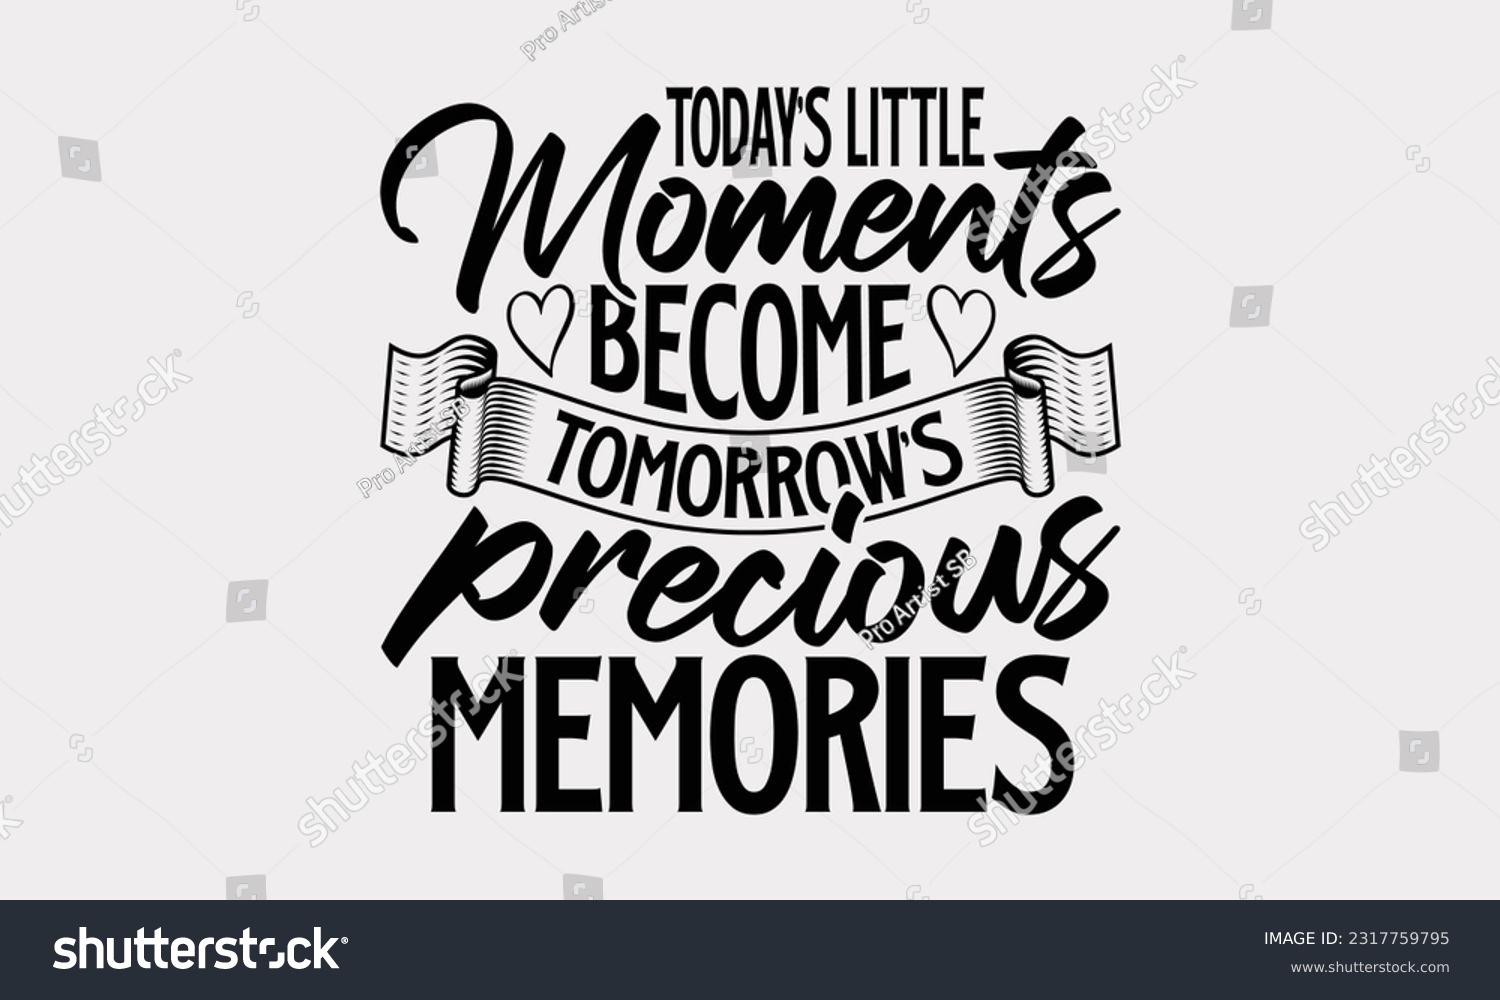 SVG of Today’s Little Moments Become Tomorrow’s Precious Memories - Family SVG Design, Hand Drawn Vintage Illustration With Hand-Lettering And Decoration Elements, EPS 10. svg